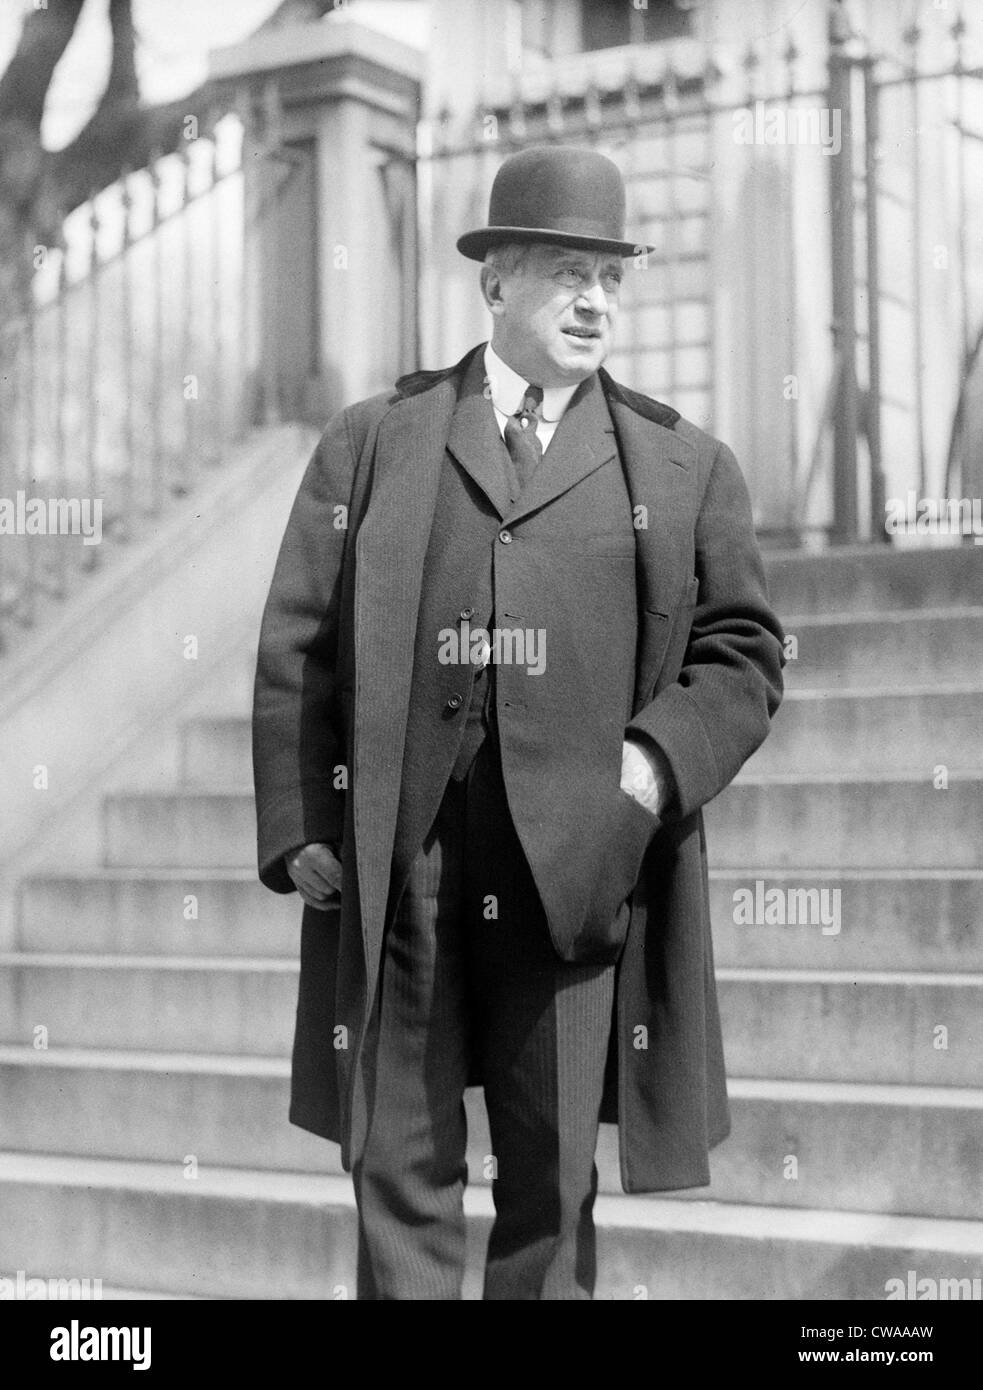 Charles M. Schwab (1862-1939)in Washington in 1920.  He made over 200 million dollars in the steel industry and was one of the Stock Photo